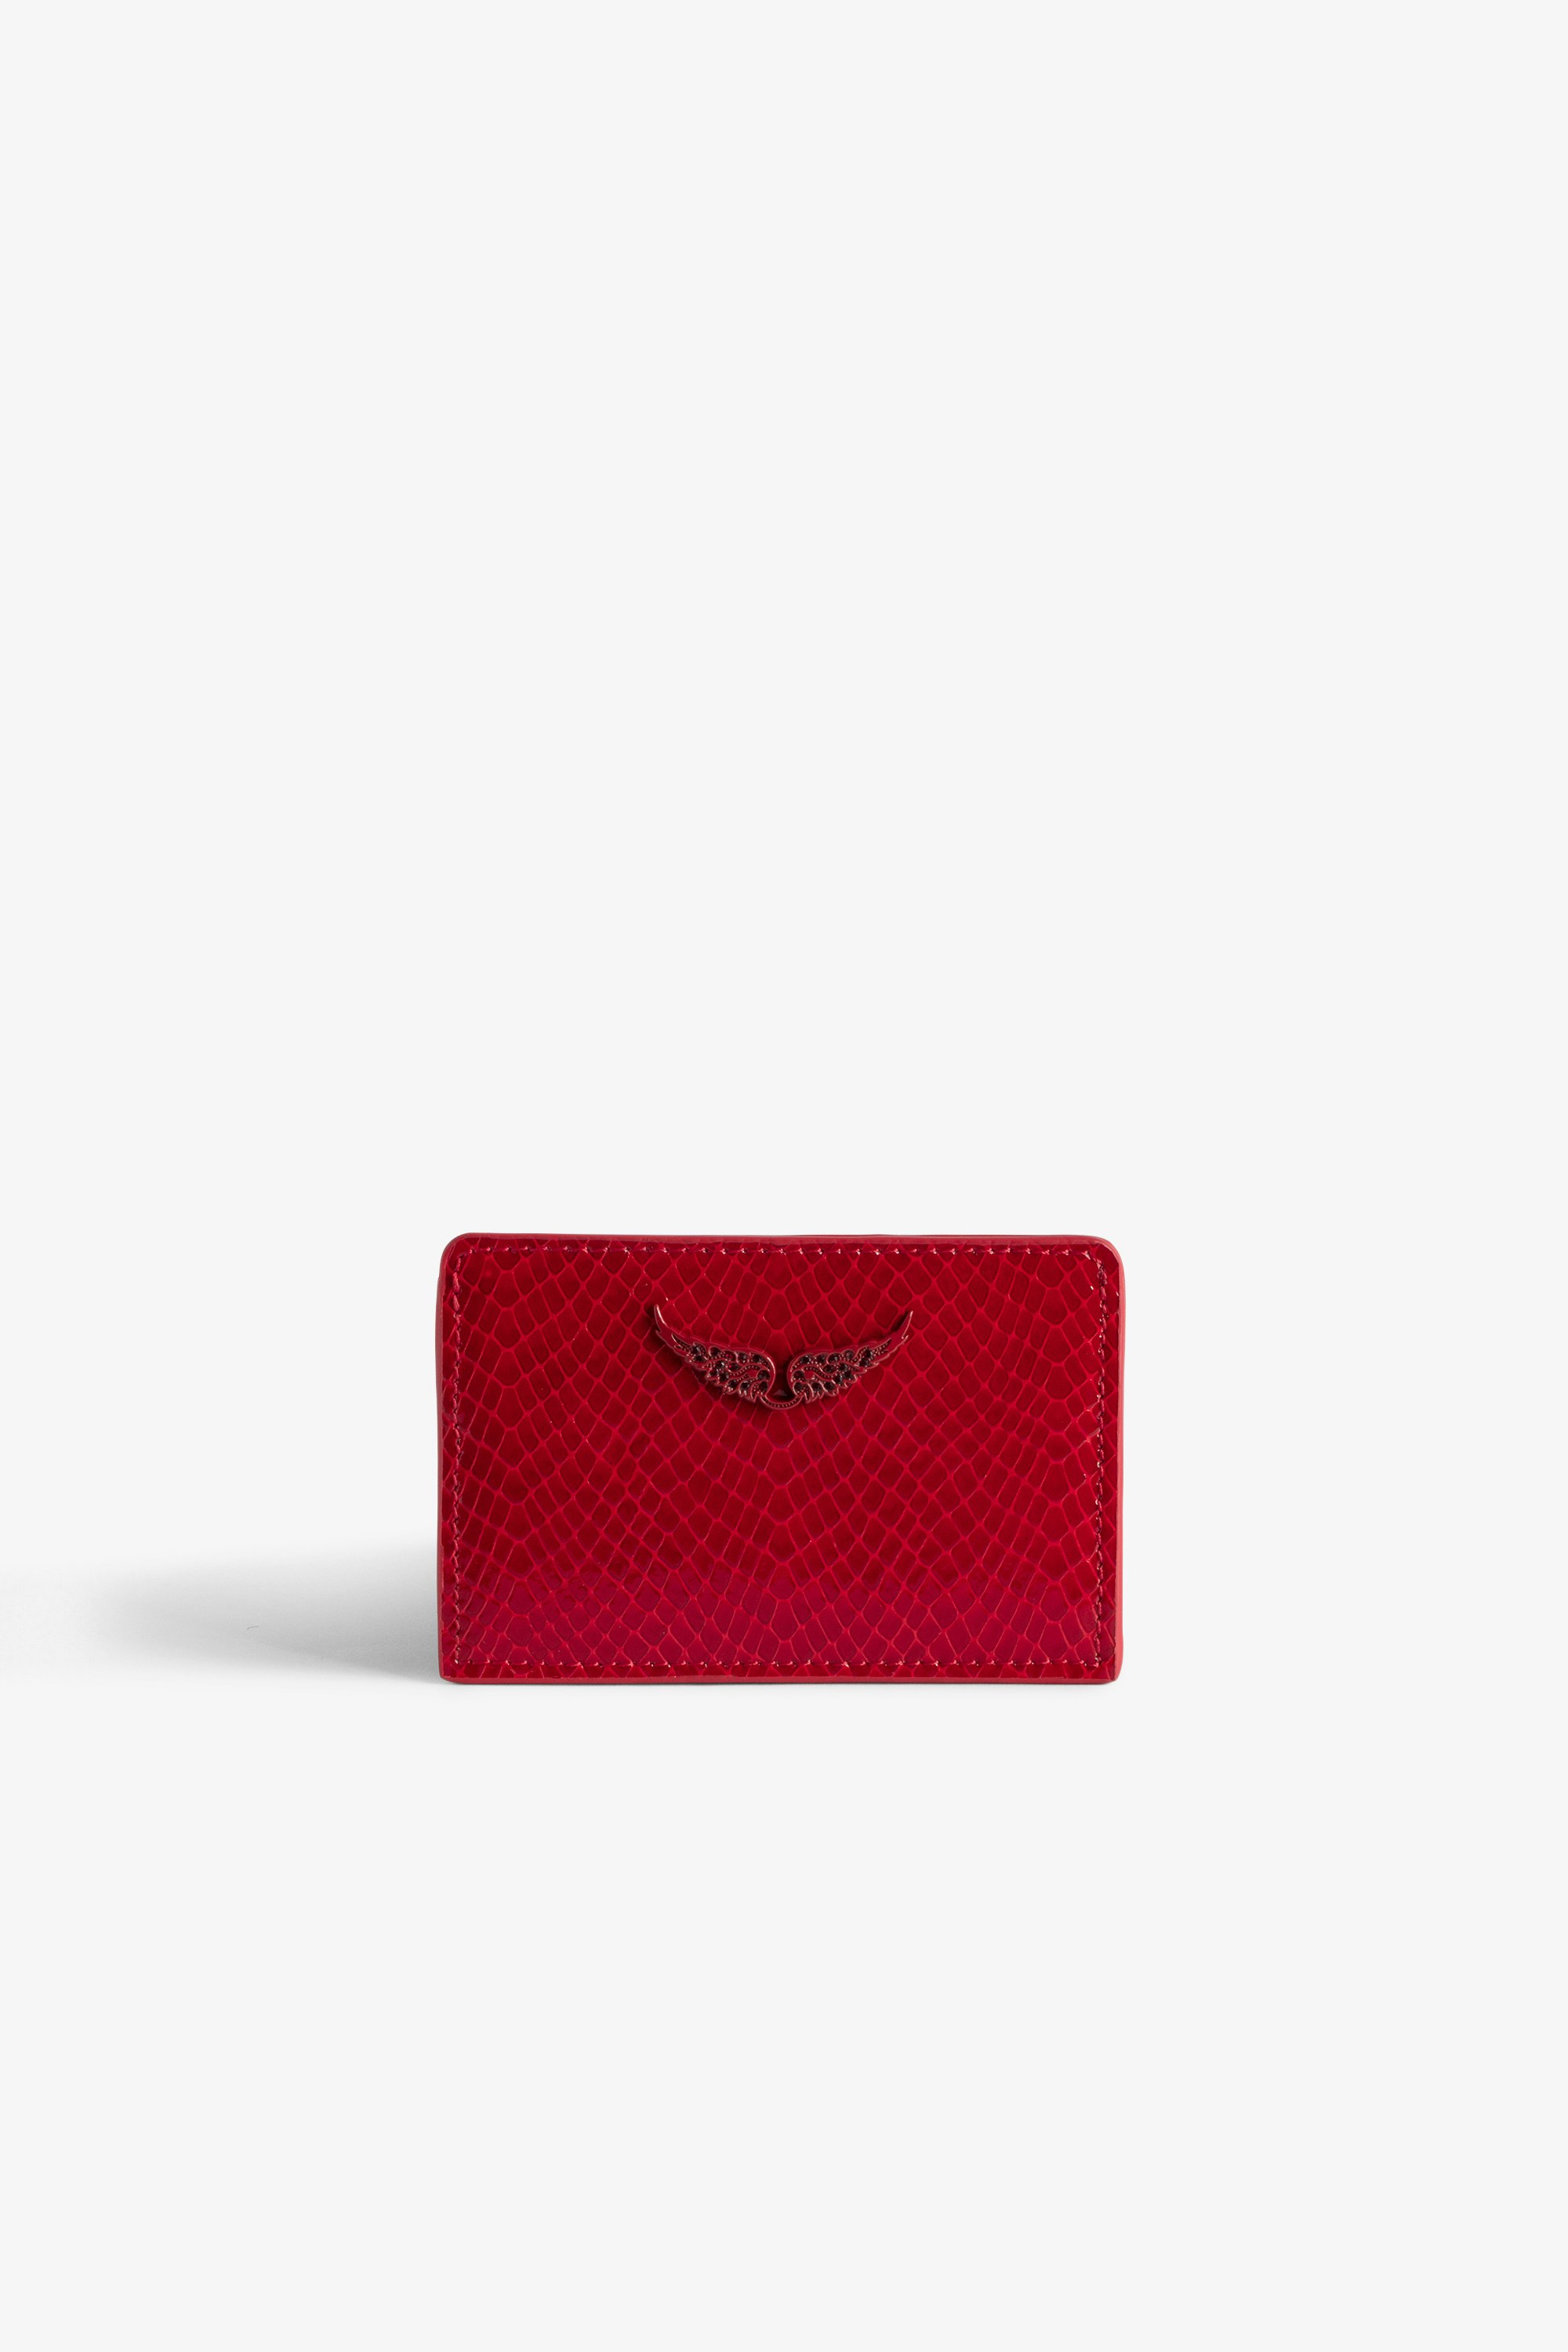 ZV Pass Embossed Card Holder - Women’s red python-effect patent leather card holder with diamanté wings charm.